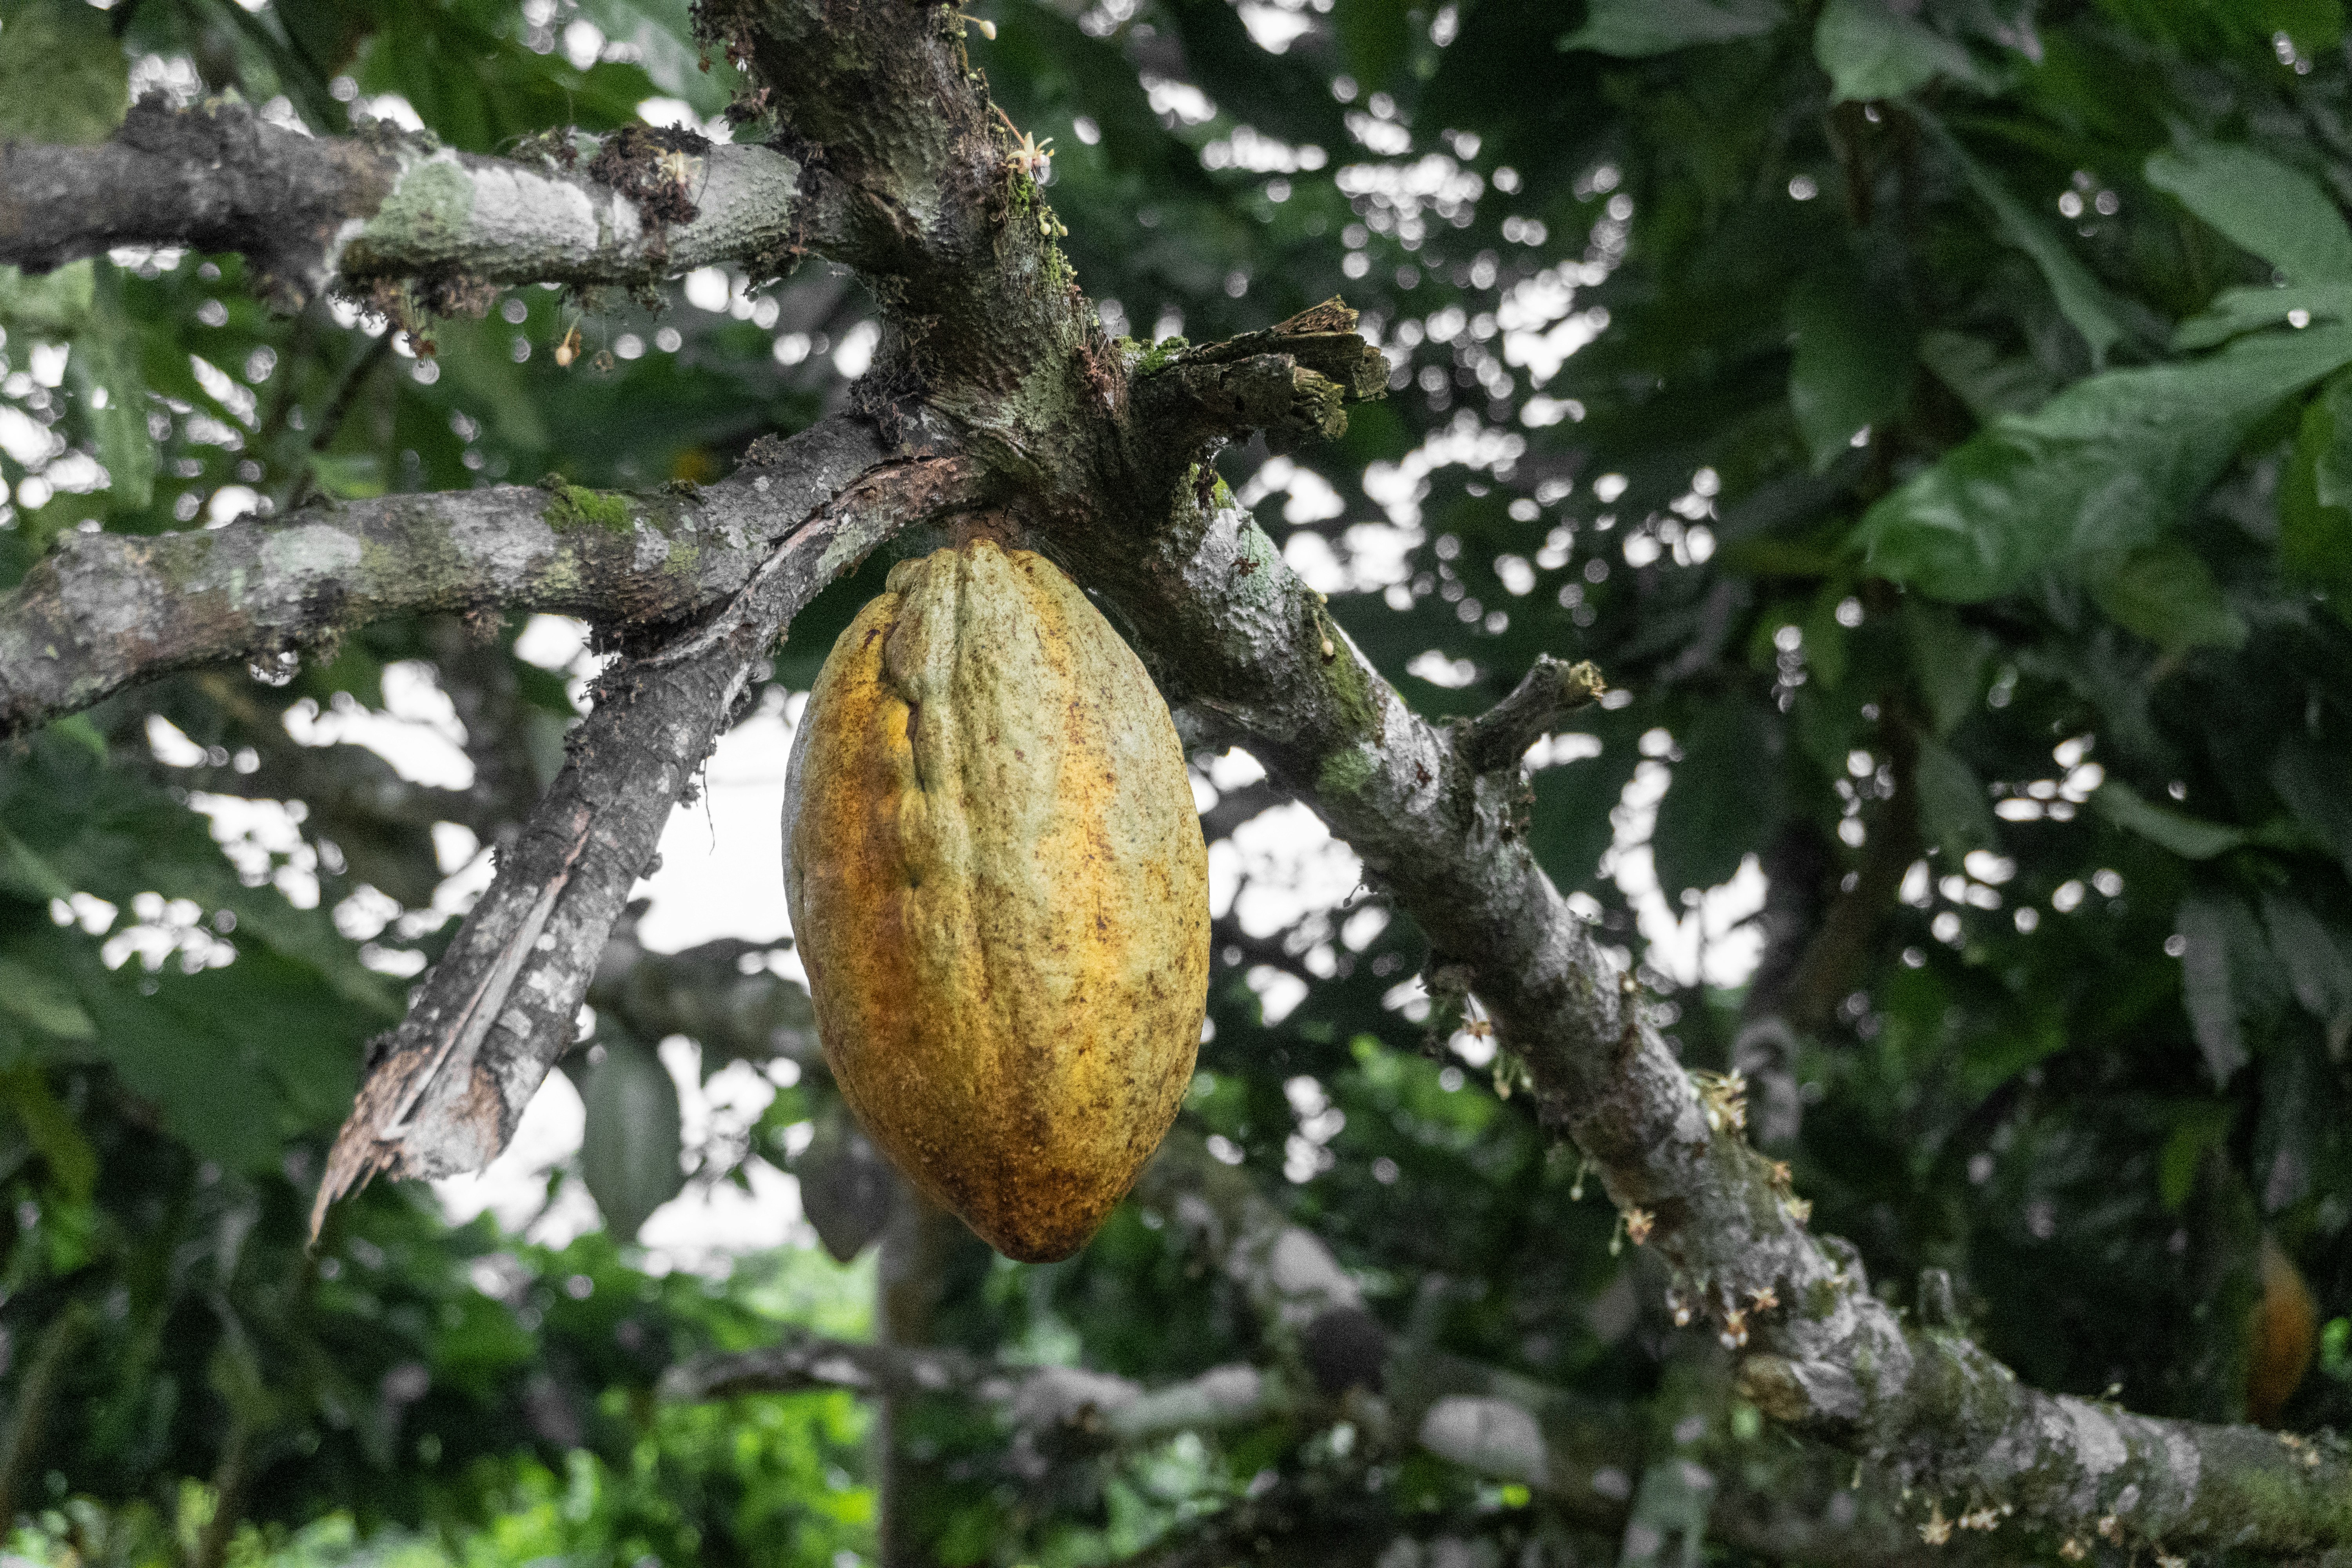 Images from a cocoa farm